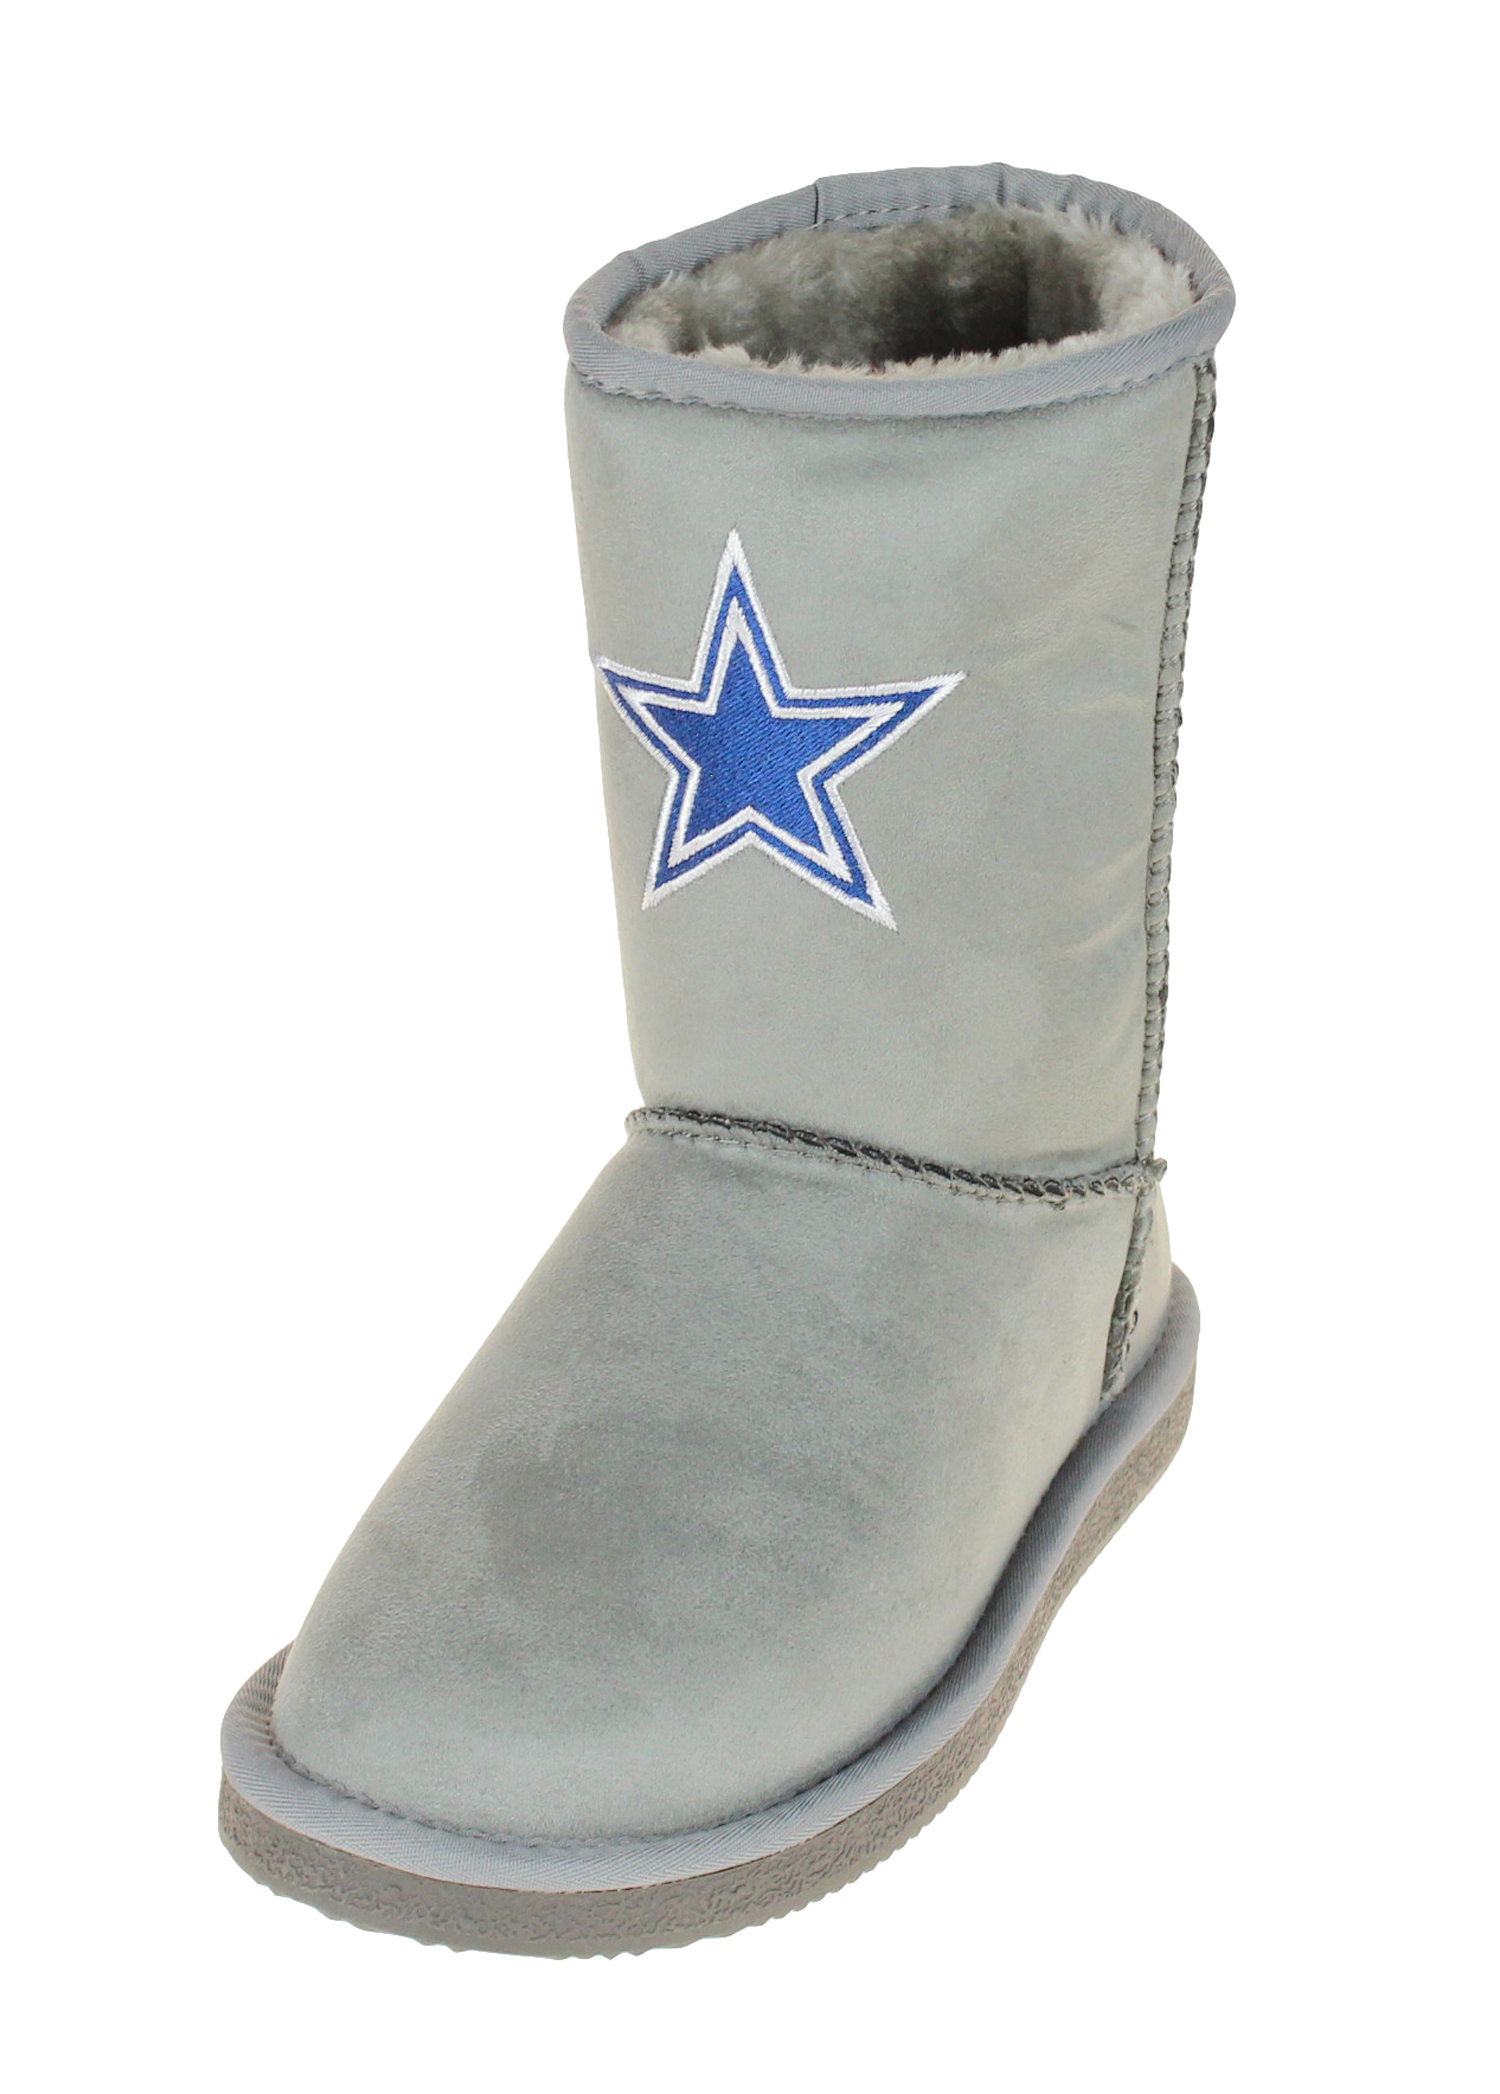 Cuce Shoes Dallas Cowboys NFL Football Women's The Devotee Boot - Gray